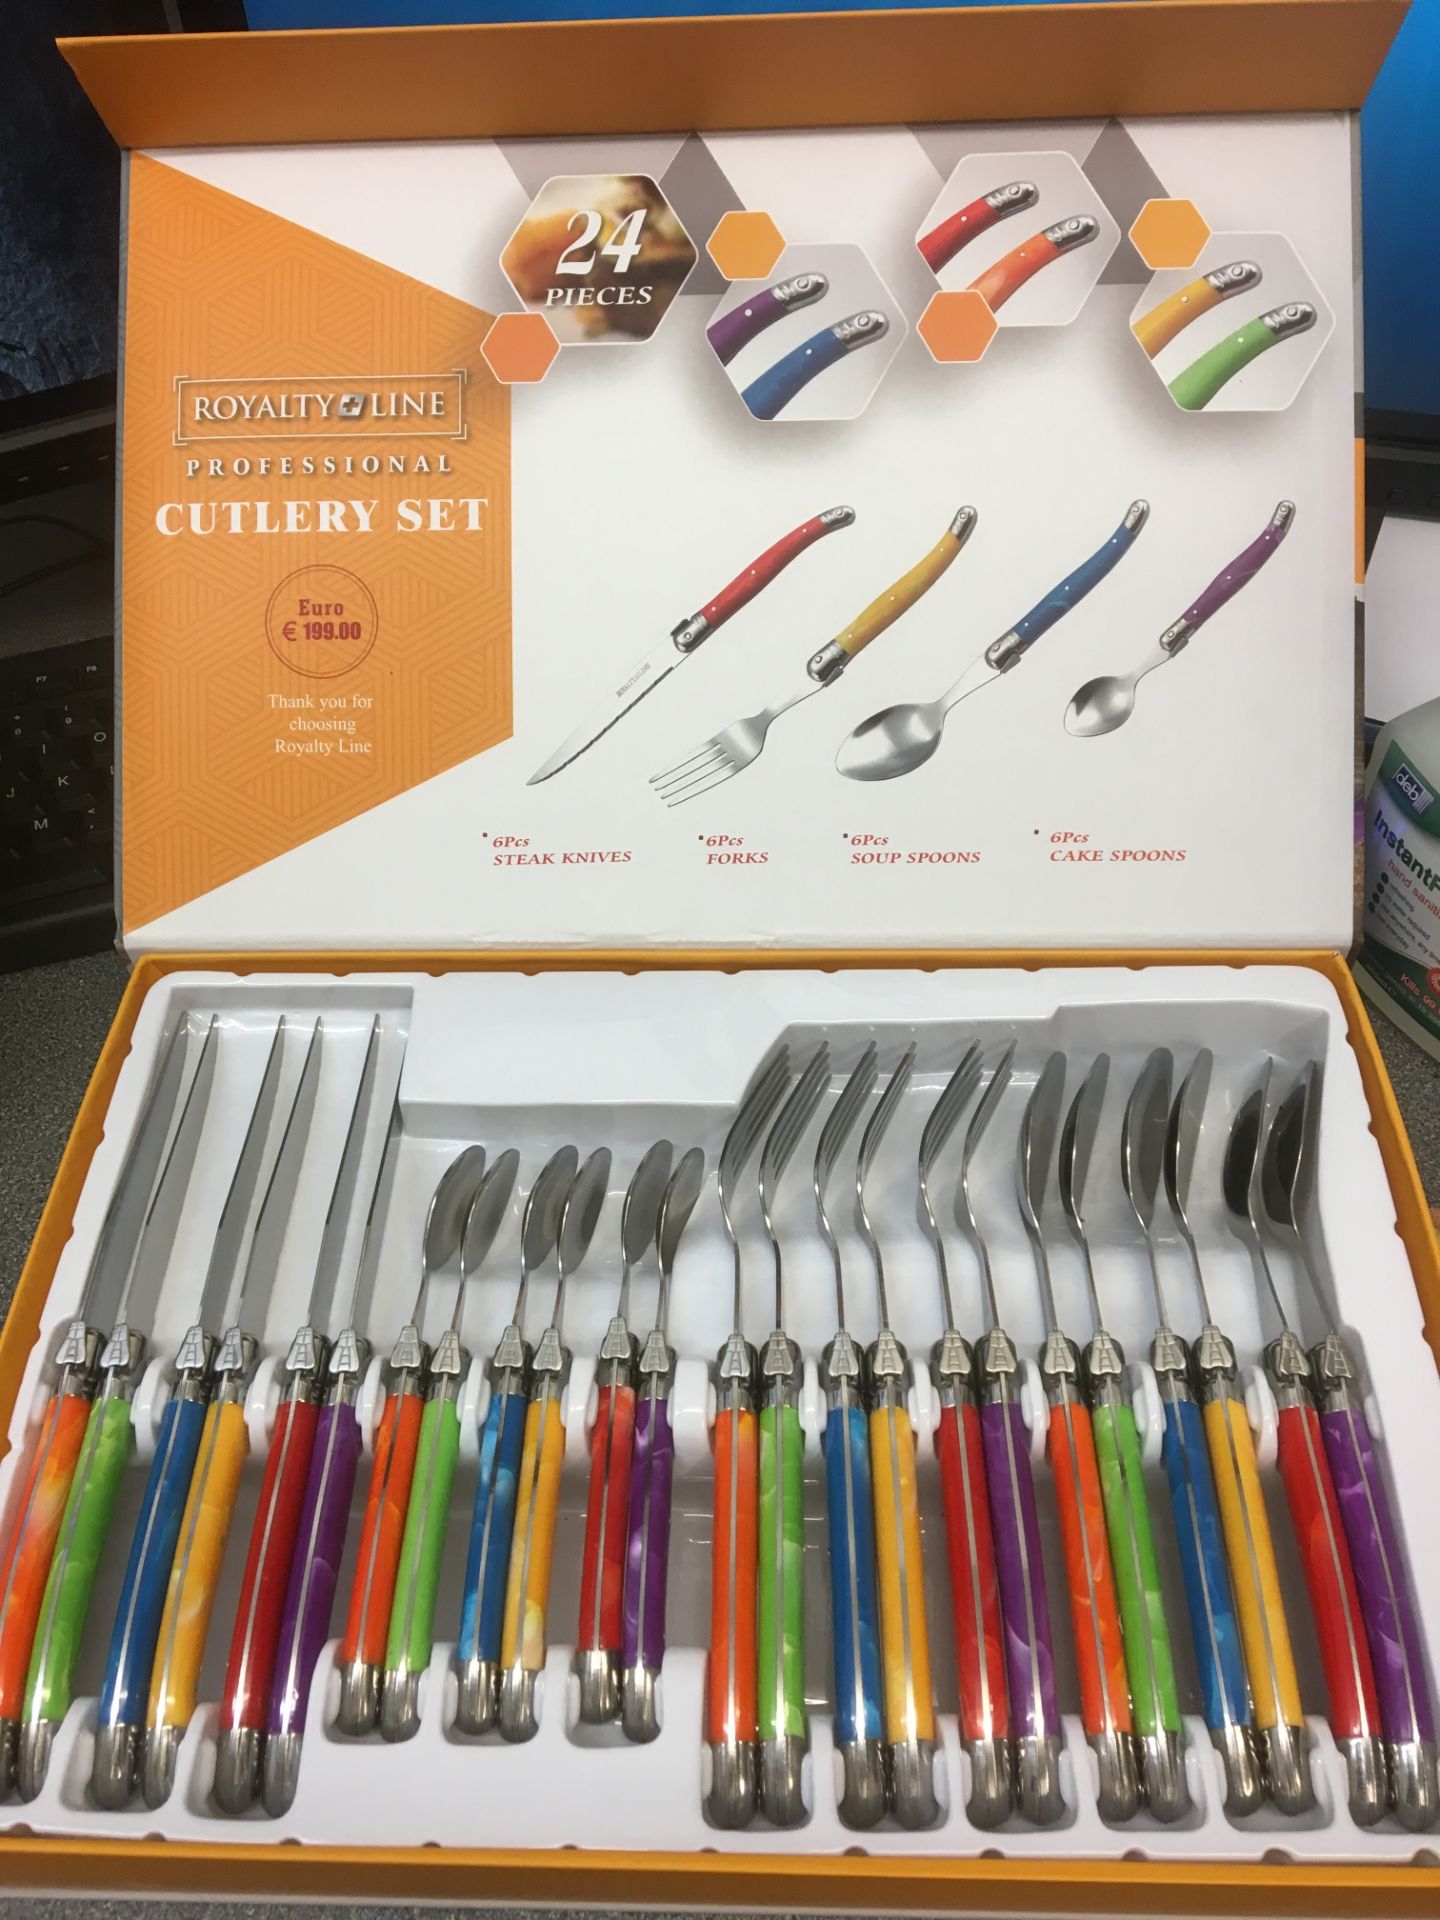 V Brand New 24 Piece Professional Cutlery Set Inlcuding Steak (Sharp) Knives - Multi Coloured Marble